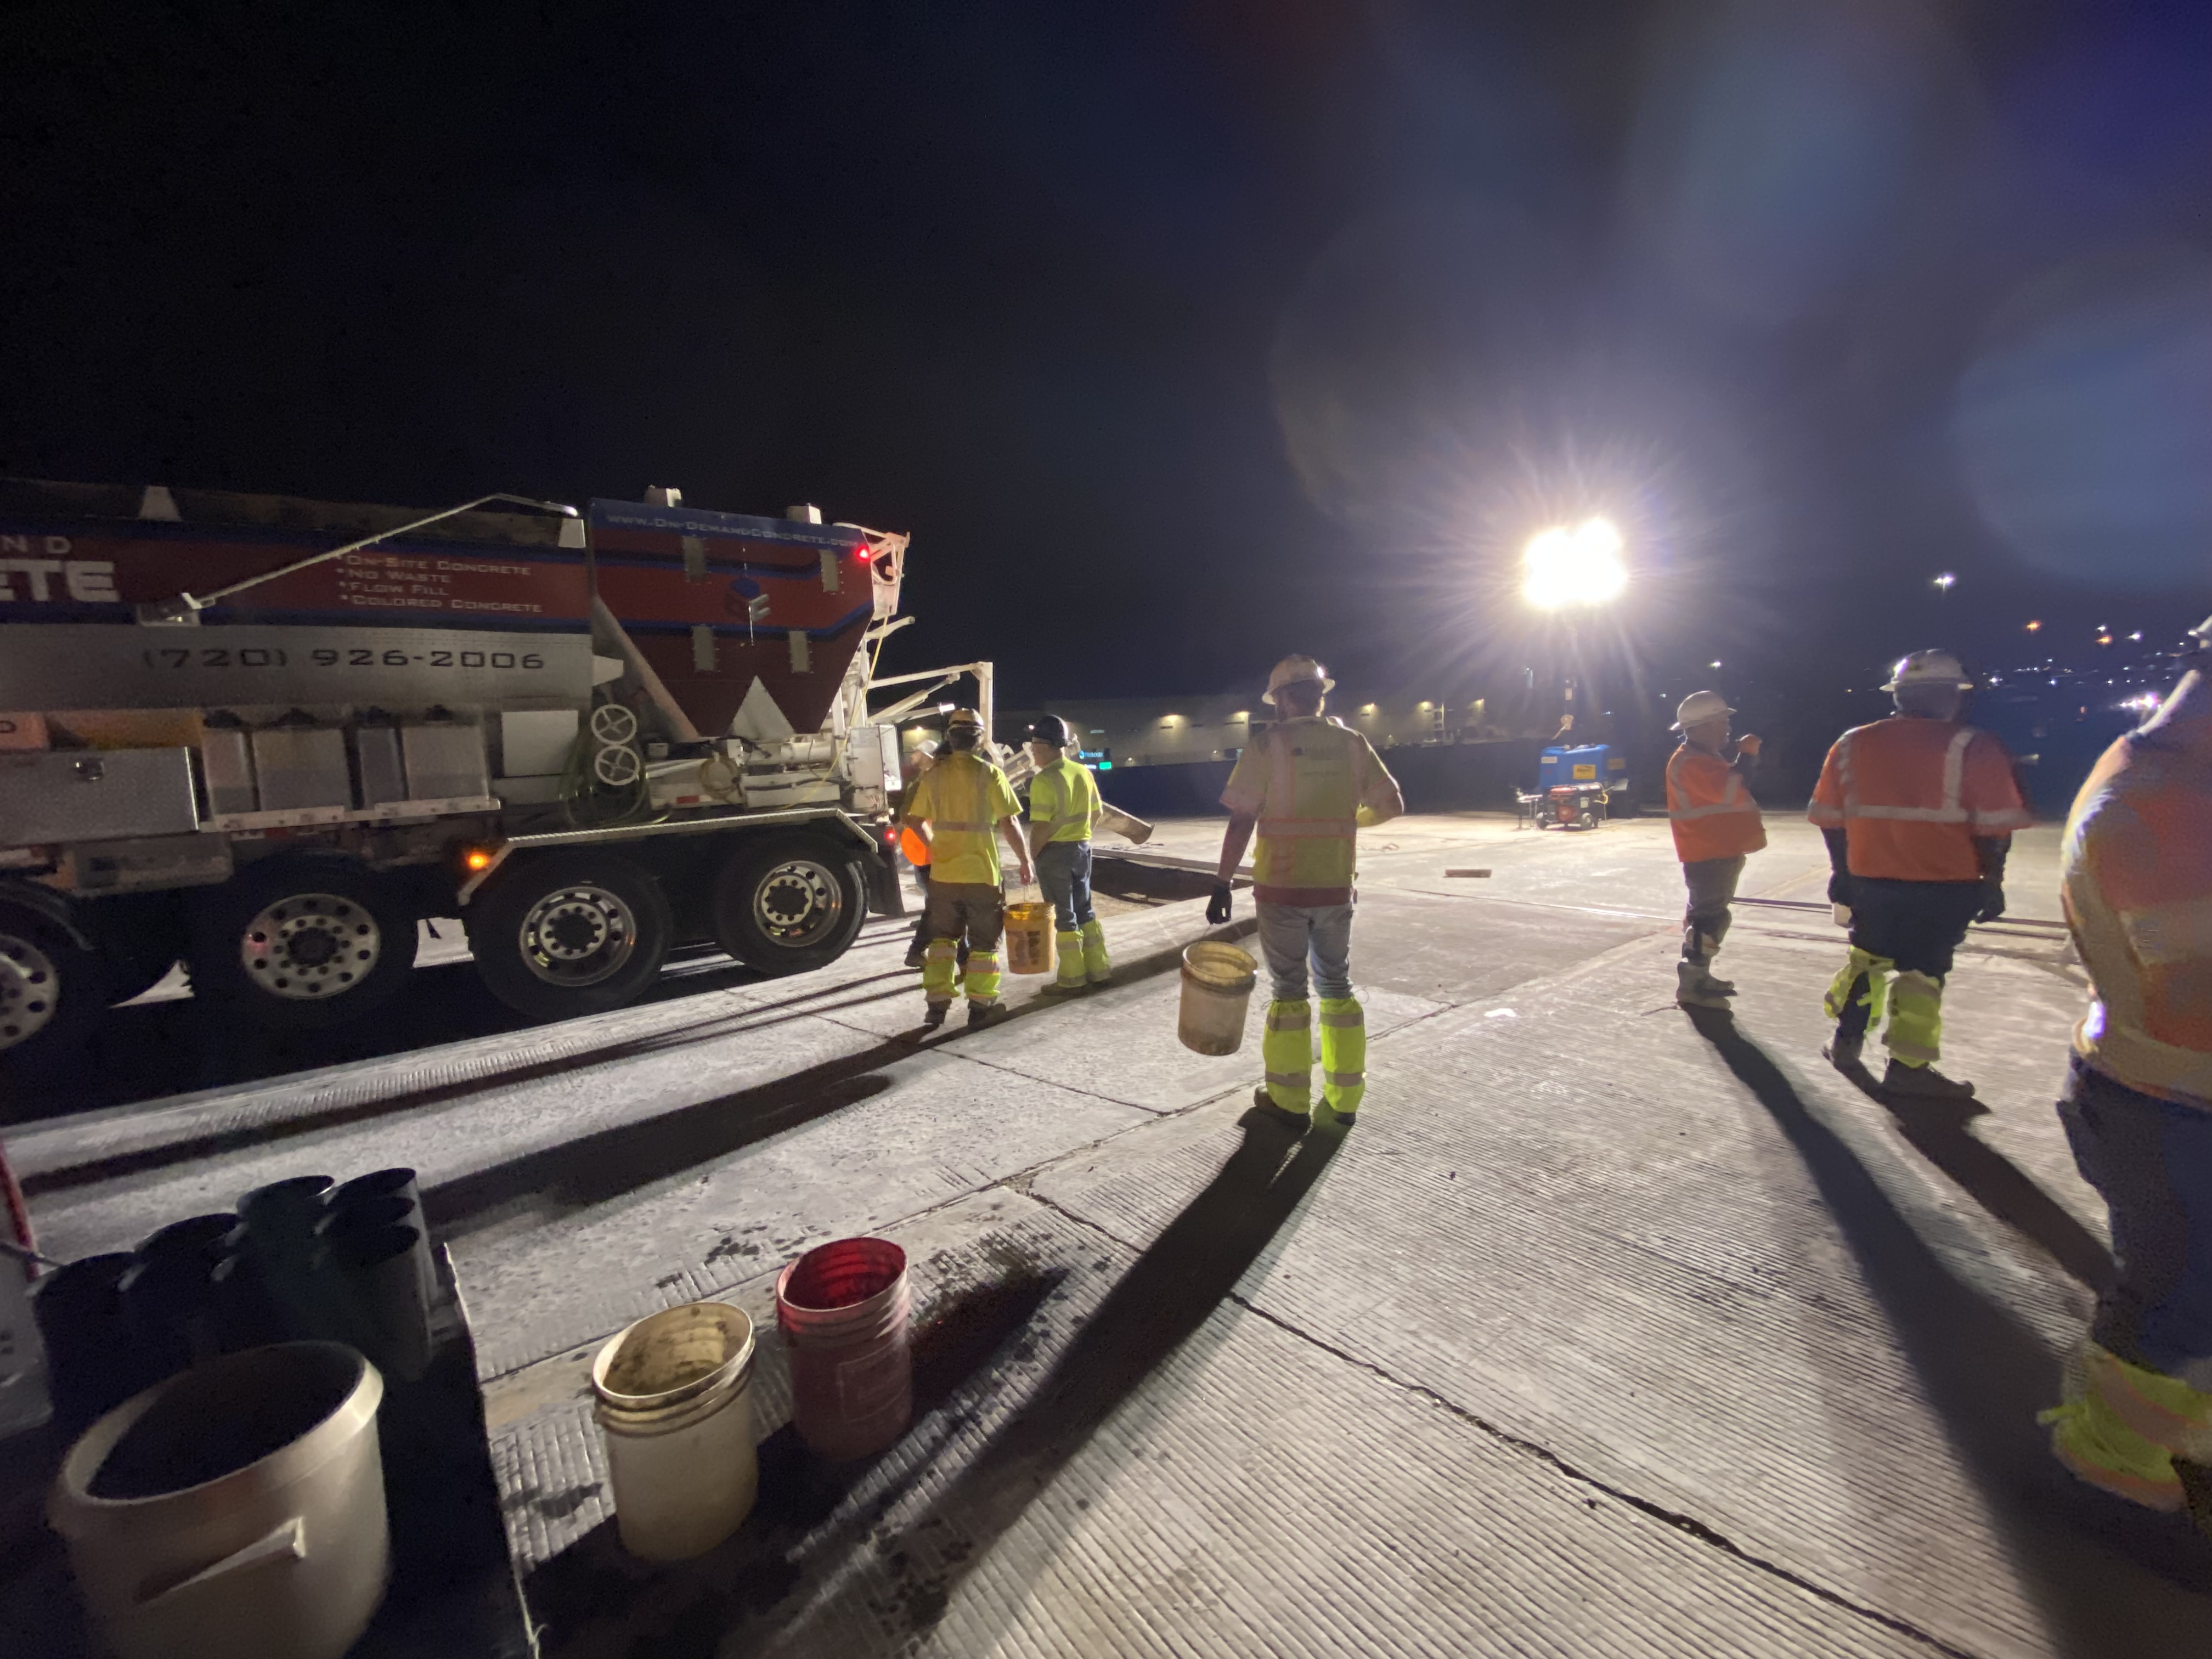 Preparations for concrete panel replacements underway on southbound I-25 detail image